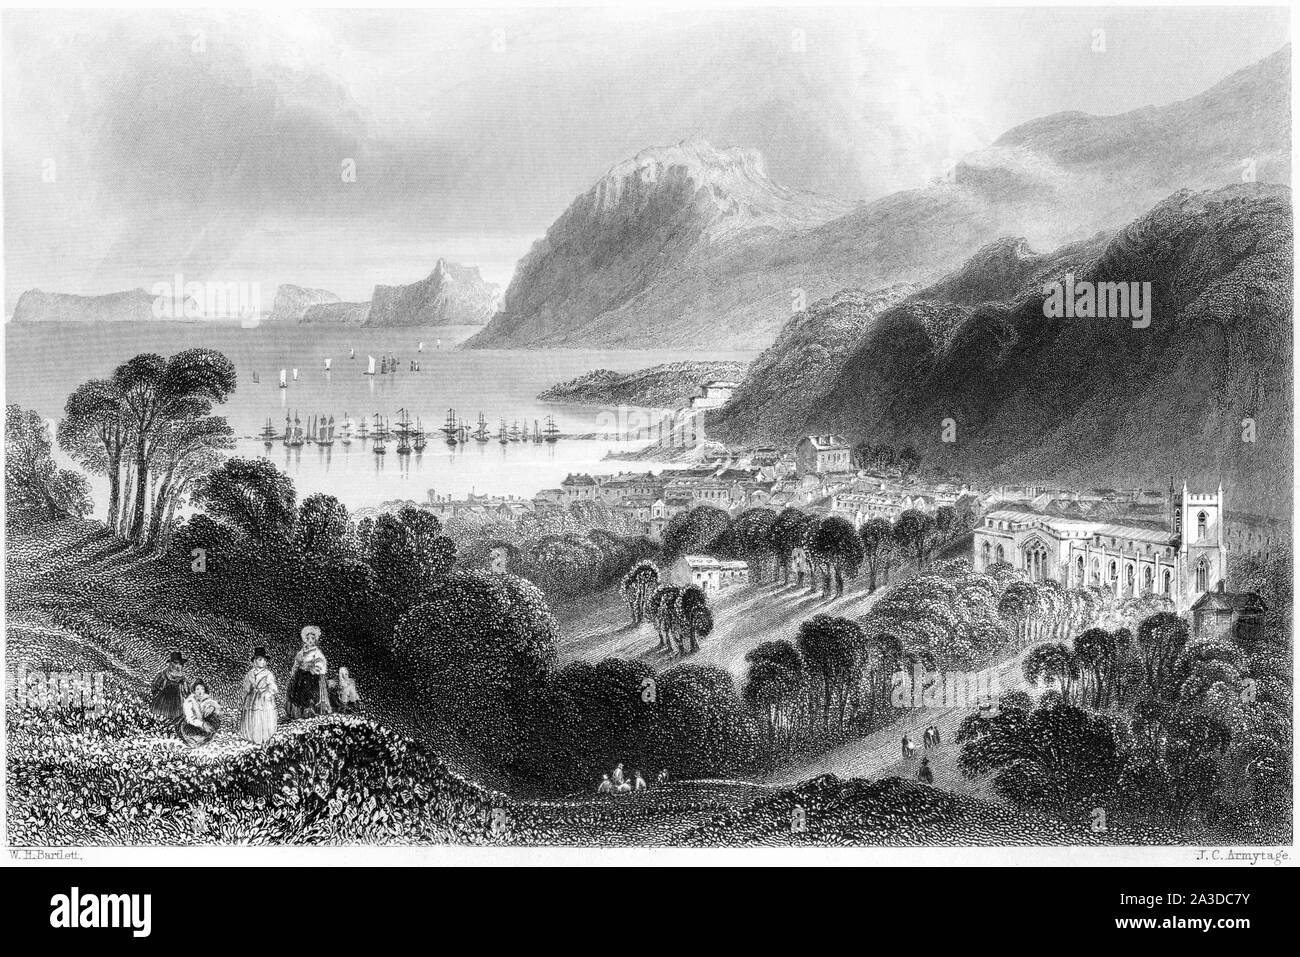 An engraving of Port Penryn and Bangor scanned at high resolution from a book printed in 1842. Believed copyright free. Stock Photo